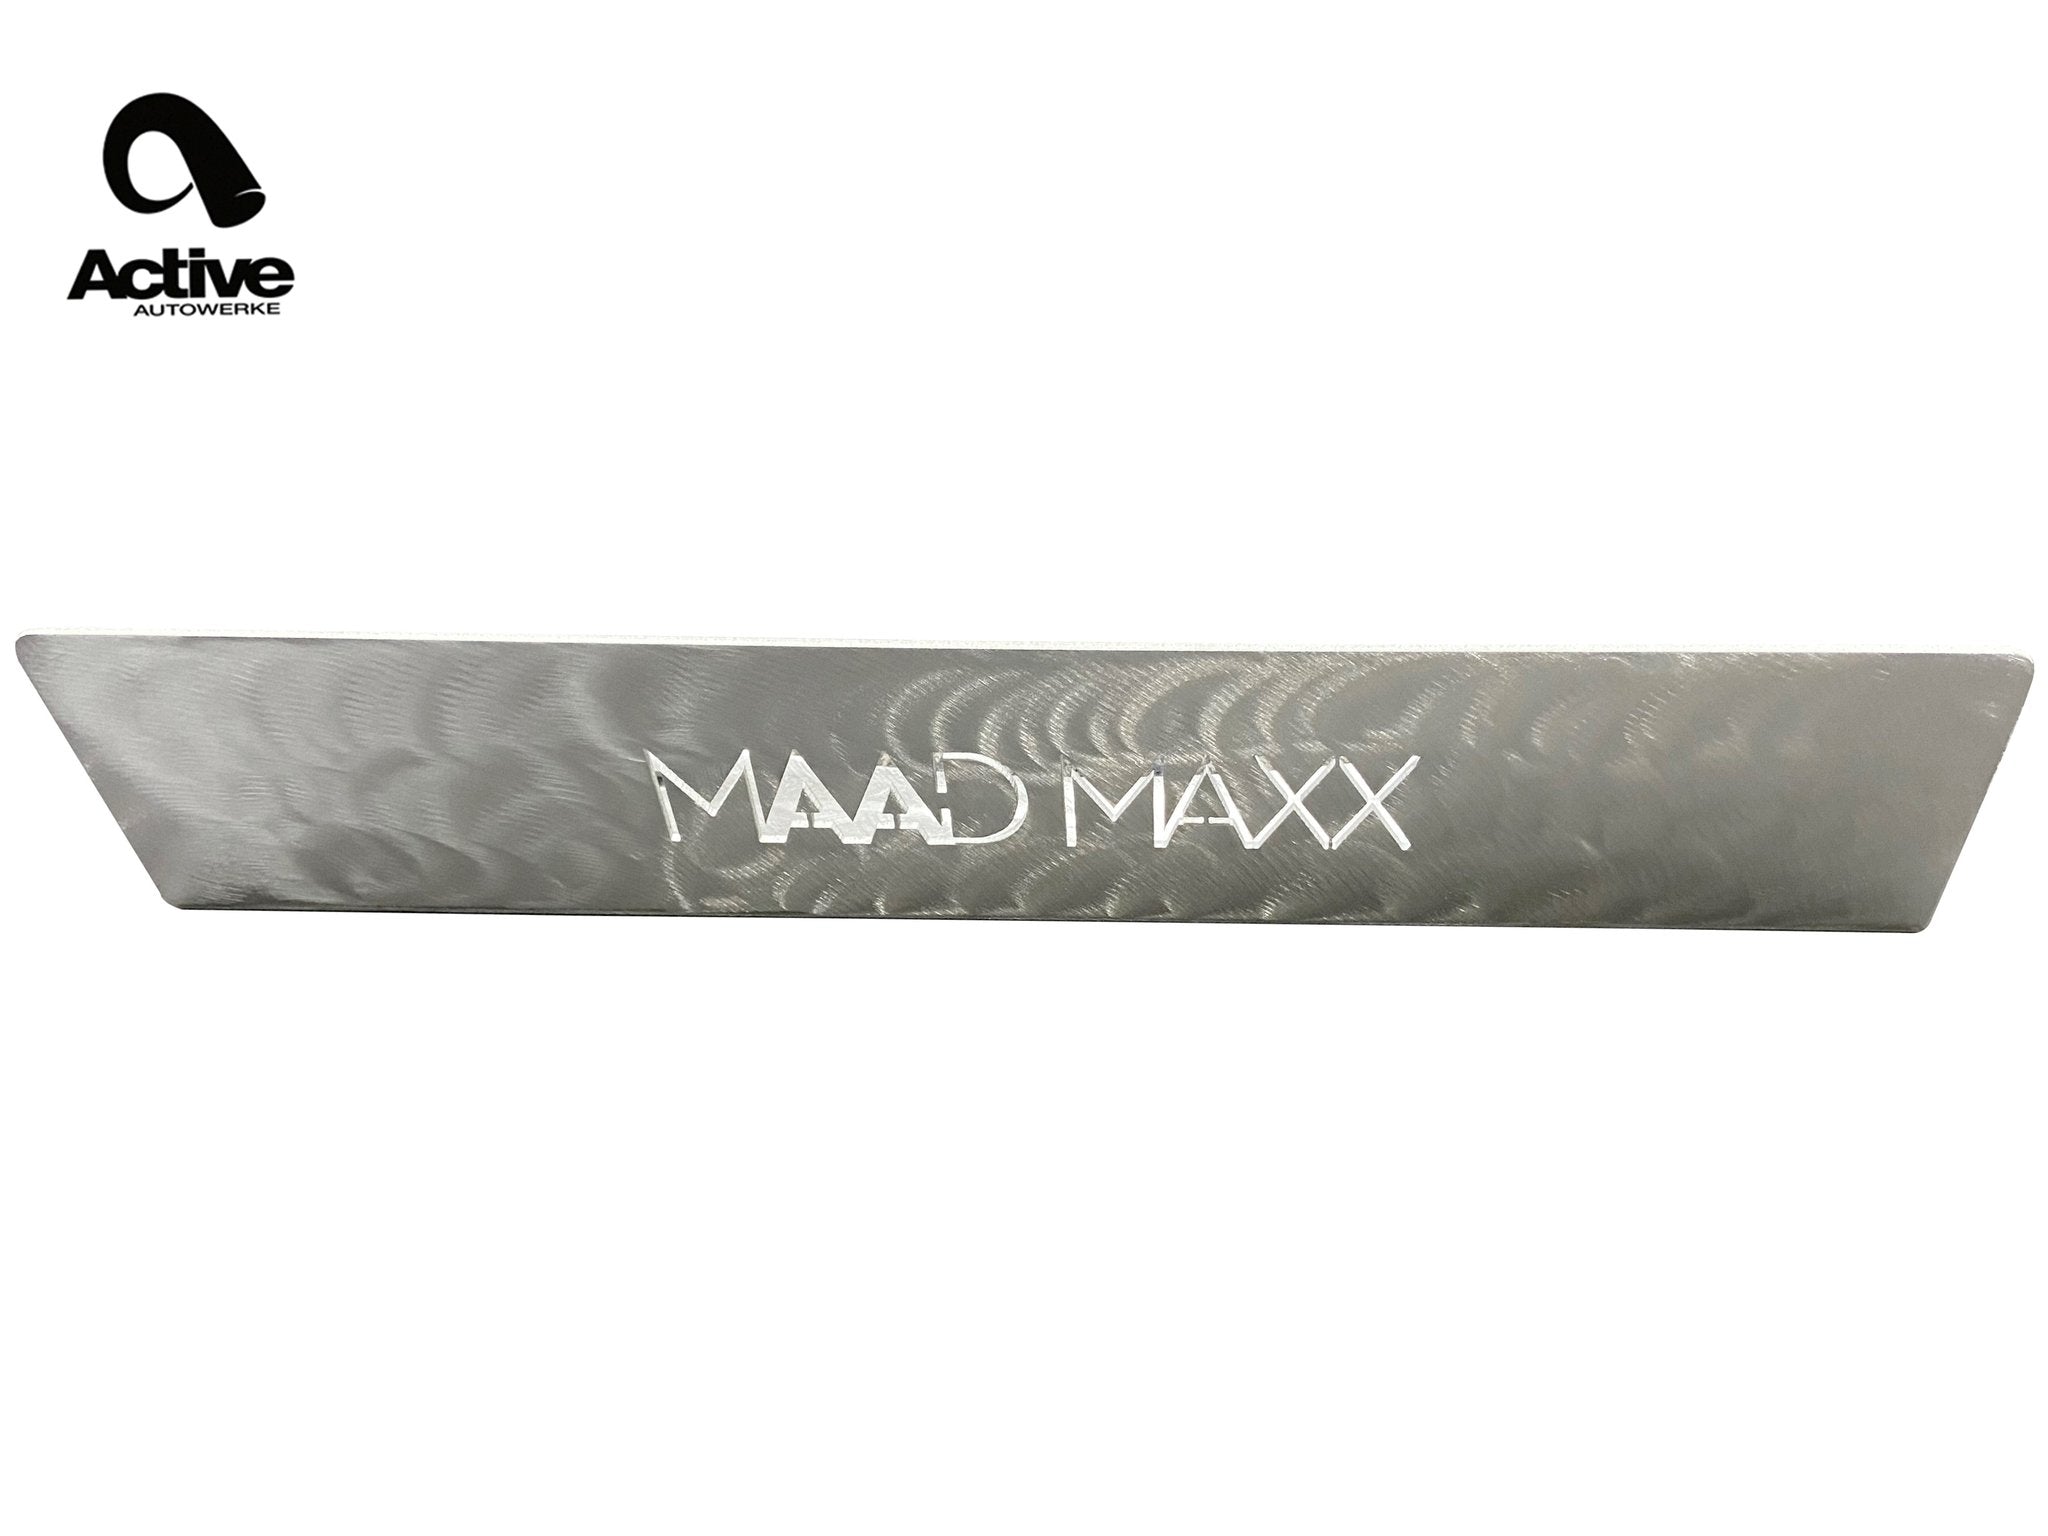 MAAD MAXX - F8X BMW M3 & M4 REAR EXHAUST SECTION - 3 CAN VALVED - 0